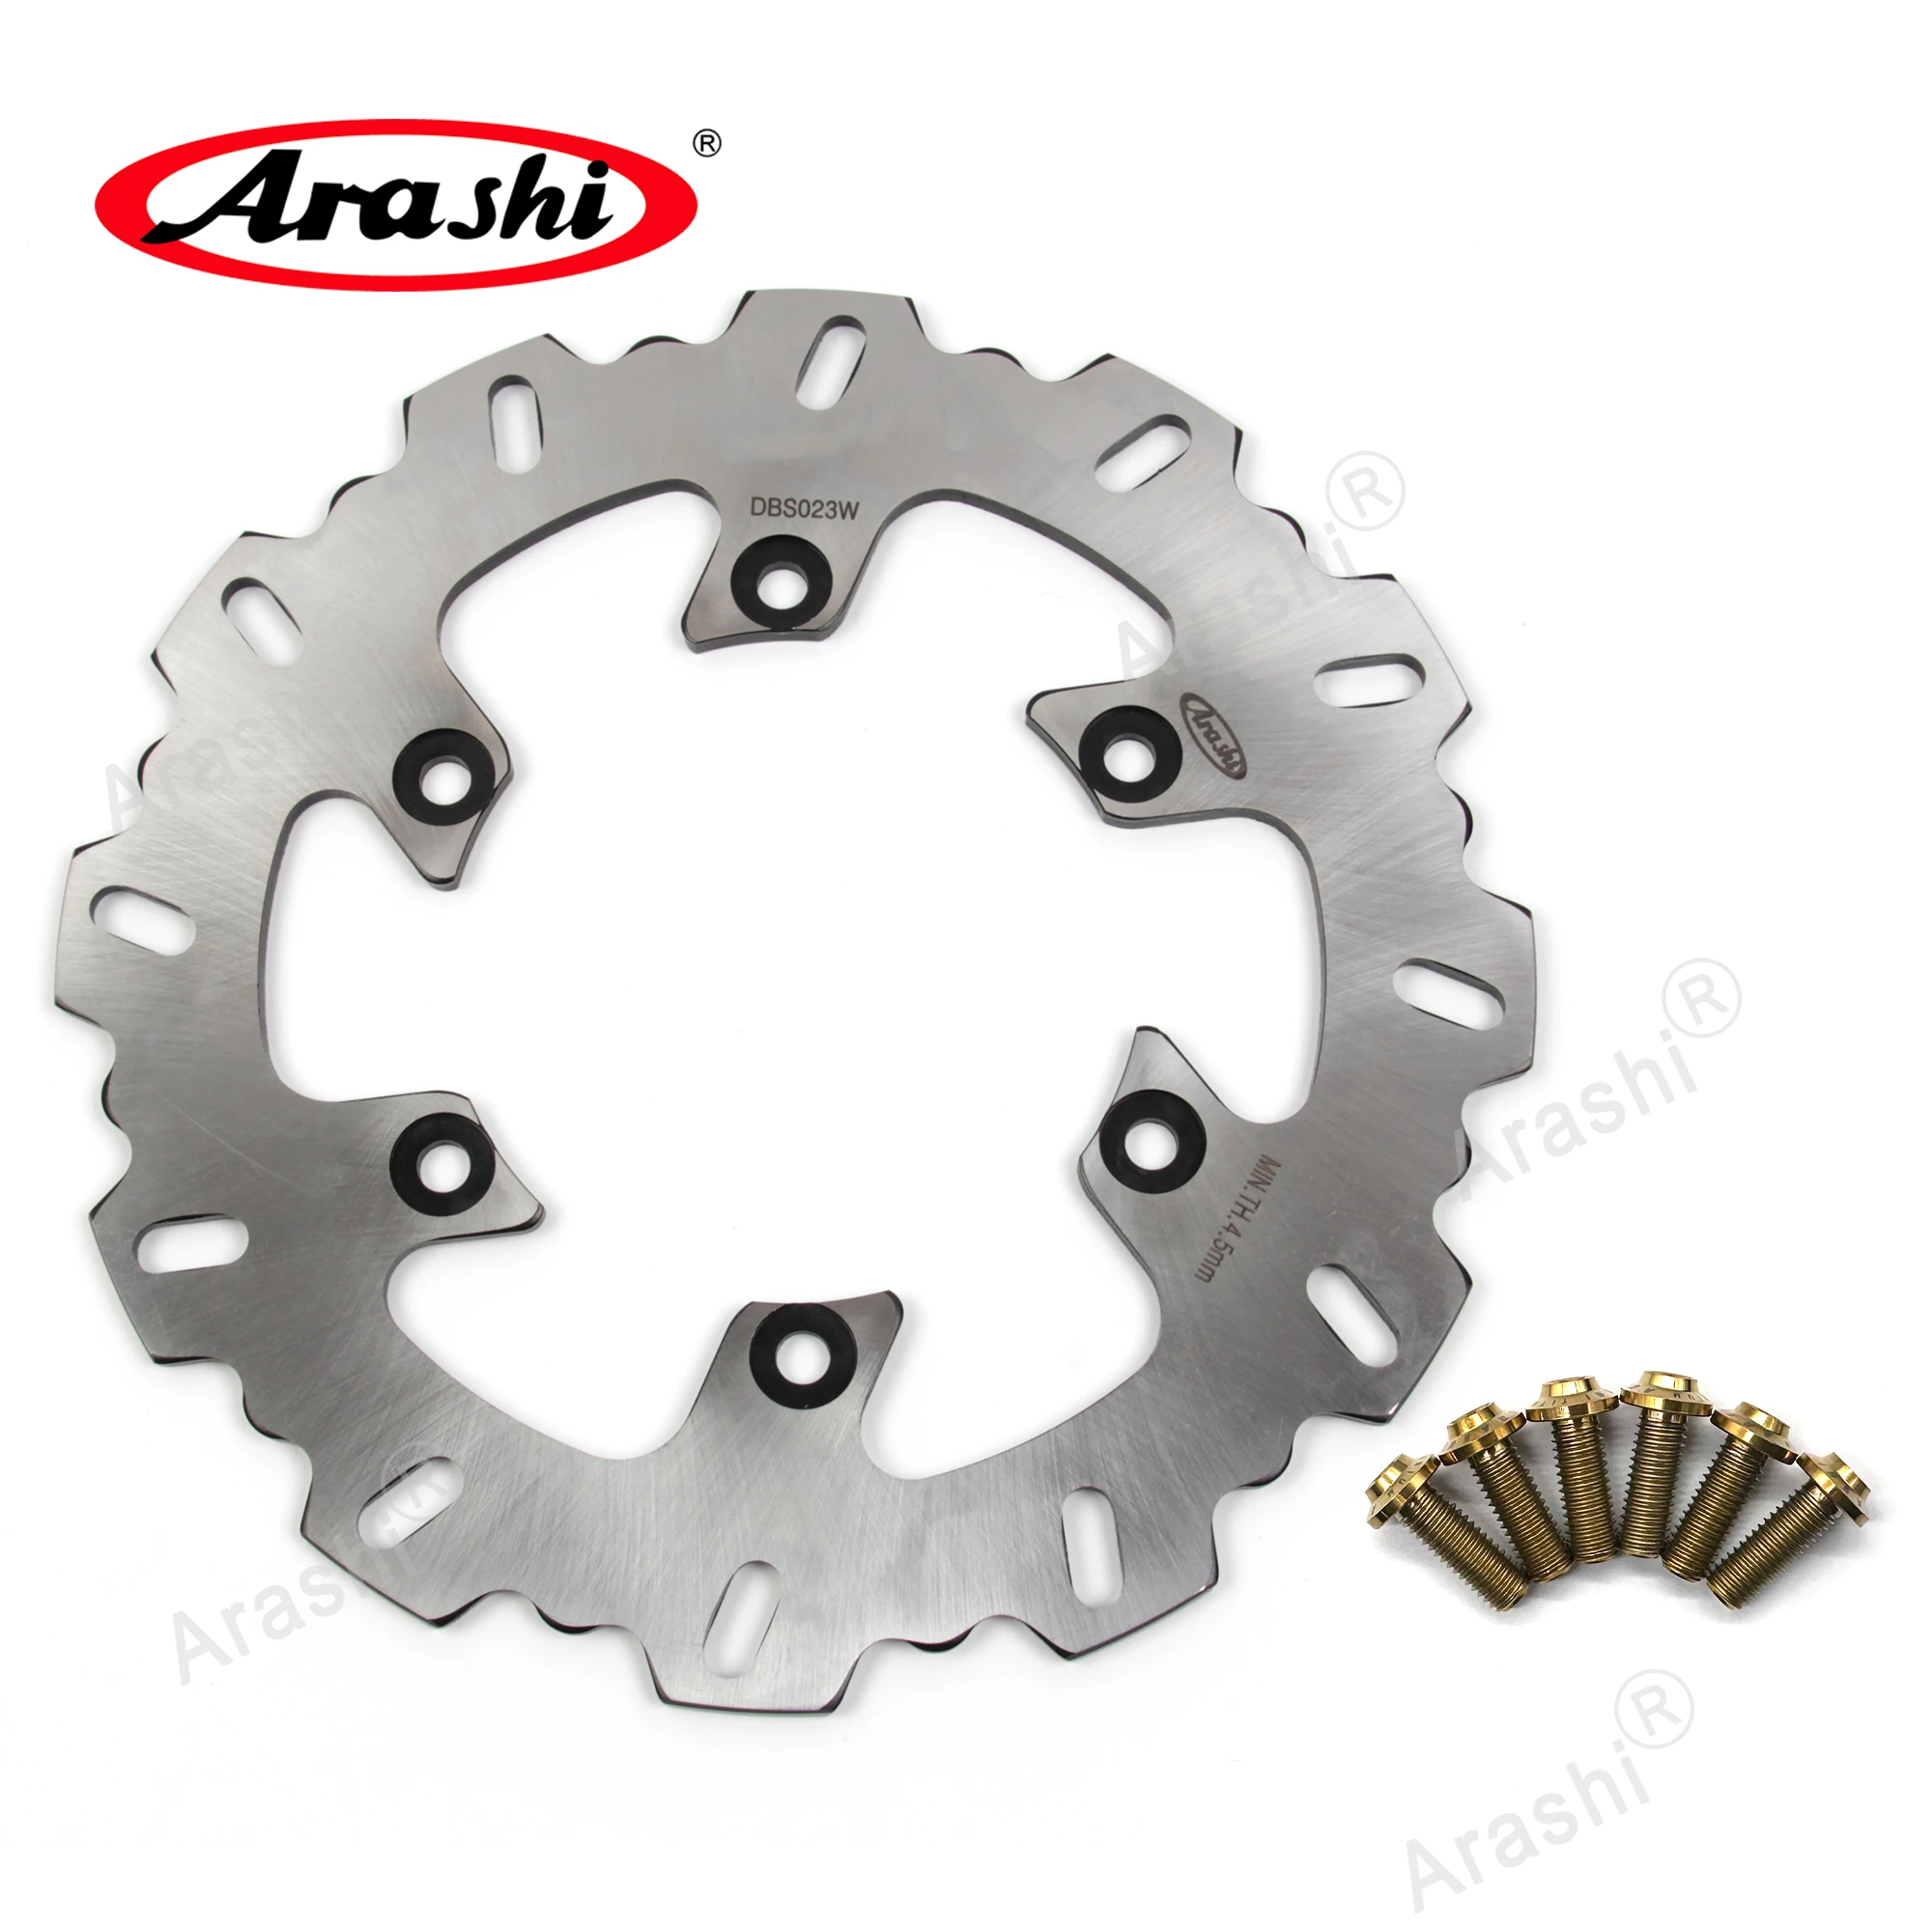 

ARASHI JUNIOR SS 350 Rear Brake Disc Motorcycle CNC Fixed Rotor Disk For DUCATI JUNIOR SS350 1991 1992 1993 Stainless Steel